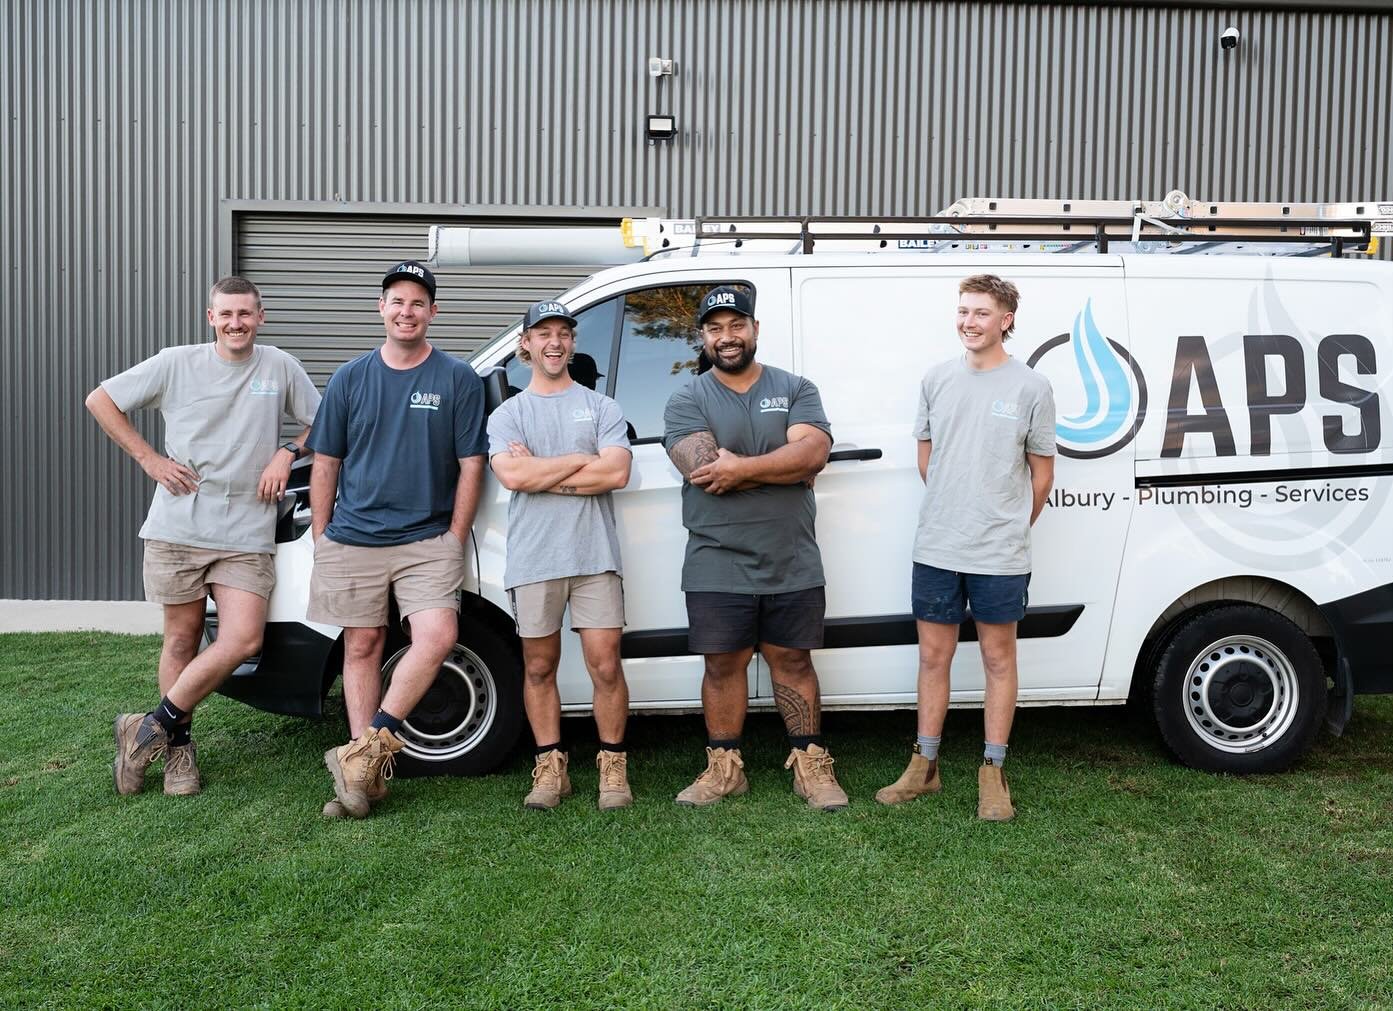 An afternoon spent with the fun team Albury Plumbing Services! Some new content and head shots coming right up! ⭐️